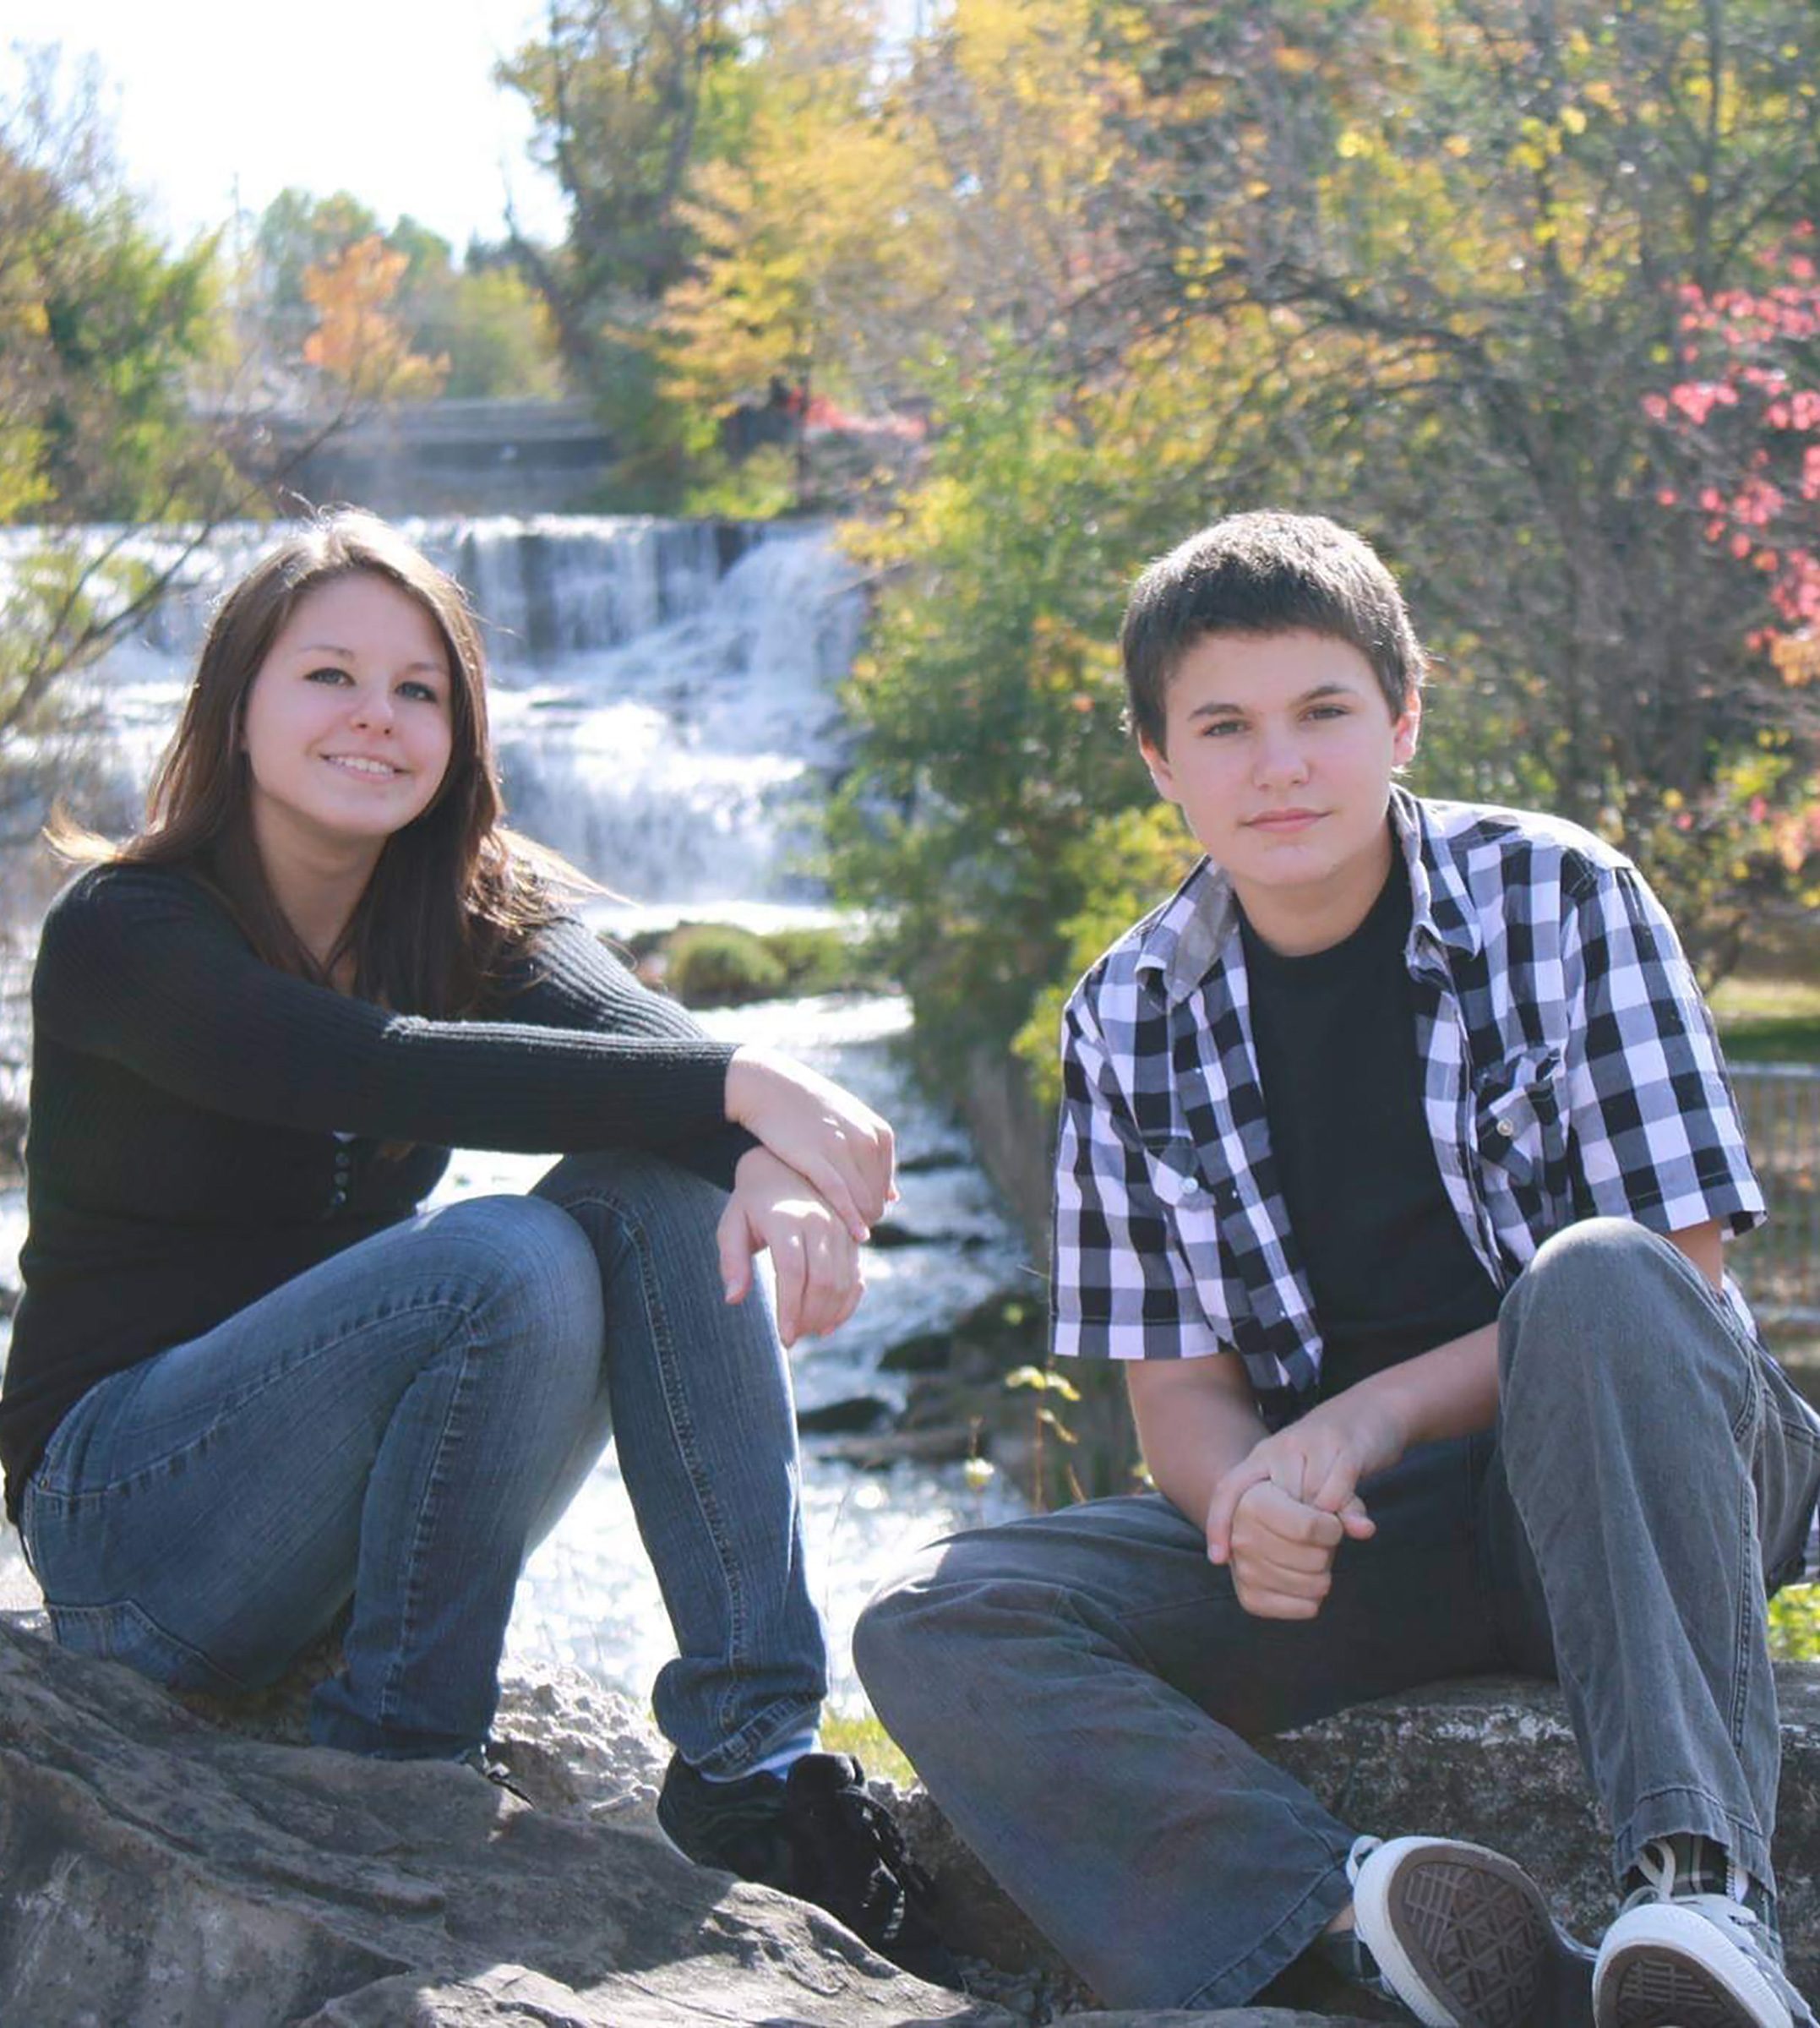 Jamey Rodemeyer, right, with his sister Alyssa in Williamsville, N.Y., Oct. 2010. (Courtesy Tracy Rodemeyer)